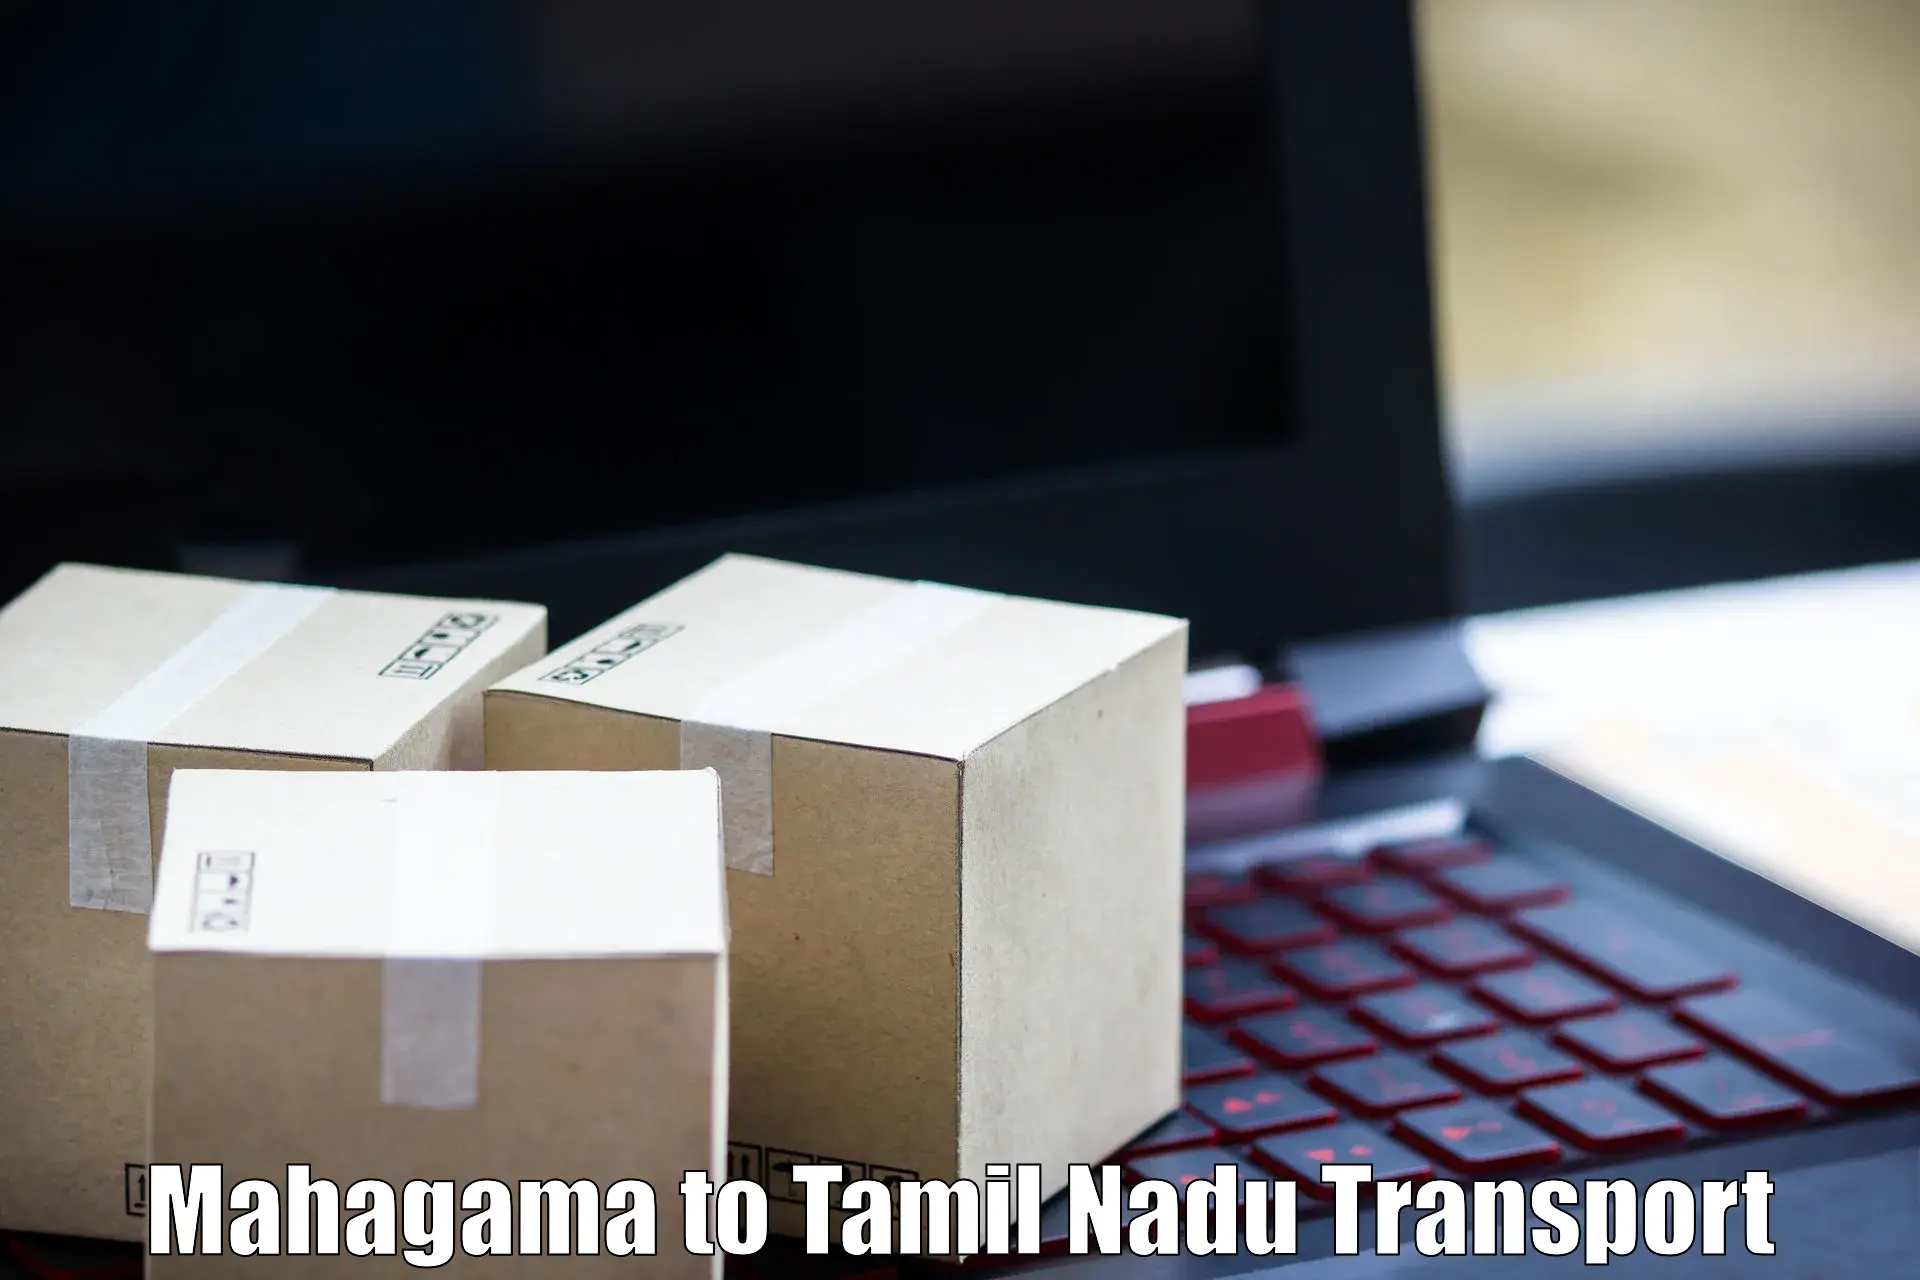 Container transport service Mahagama to Ranipet